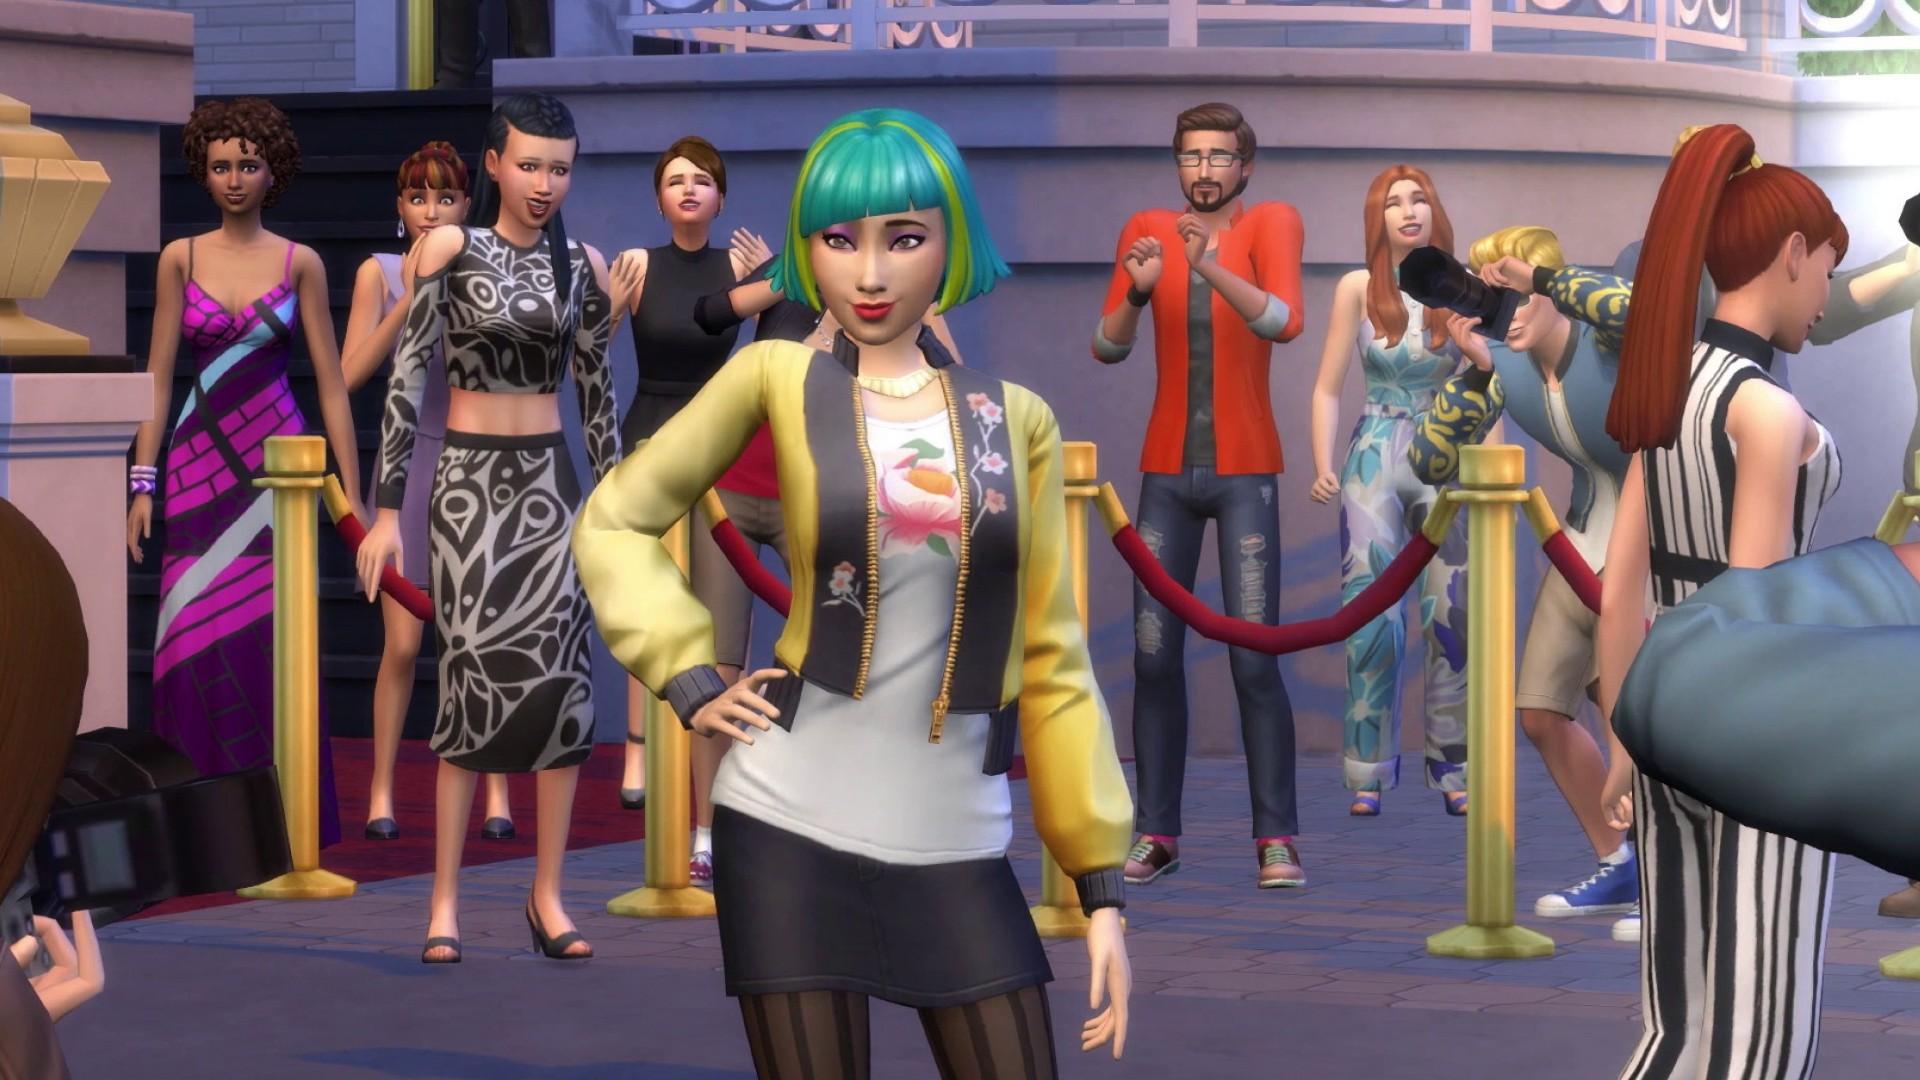 Sims 4: Get Famous' Cheats: Fame, Modify Relationship and More